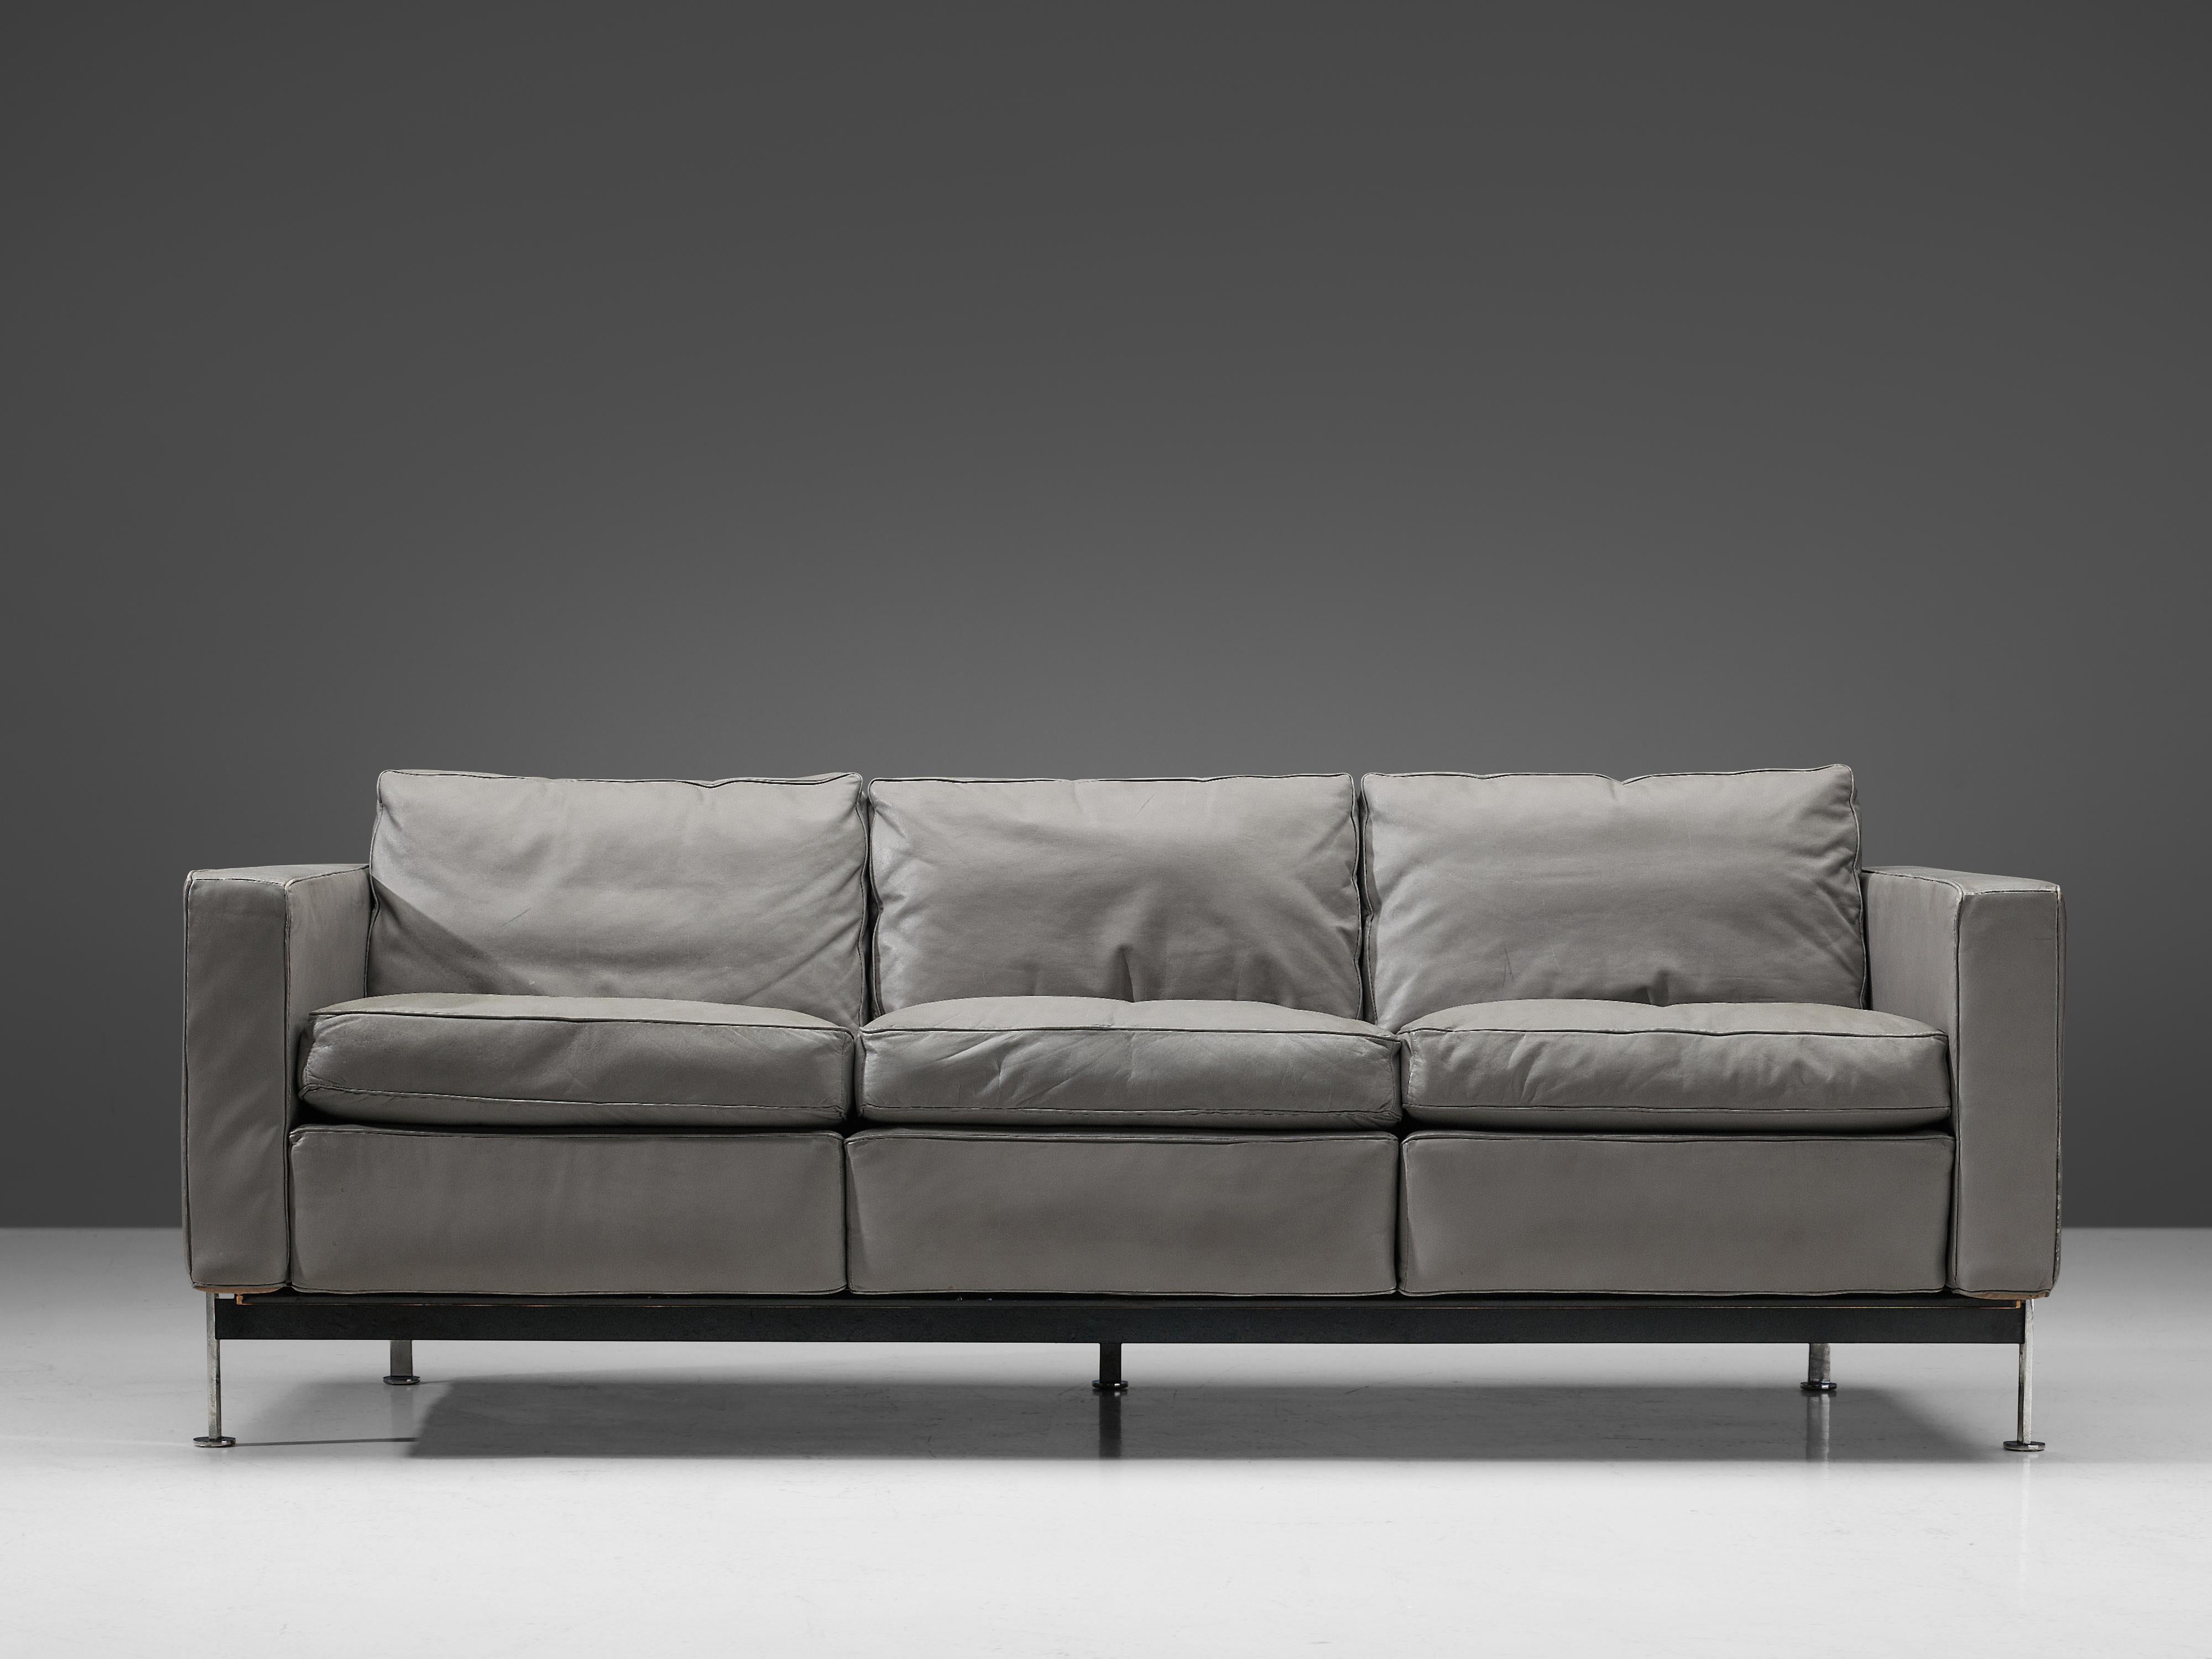 Robert Haussman for De Sede, three-seat sofa, leather and steel, Switzerland, design 1954. 

This comfortable sofa is designed by Robert Haussmann for De Sede and features a chromed frame that functions as a basket for the cushions. The thick